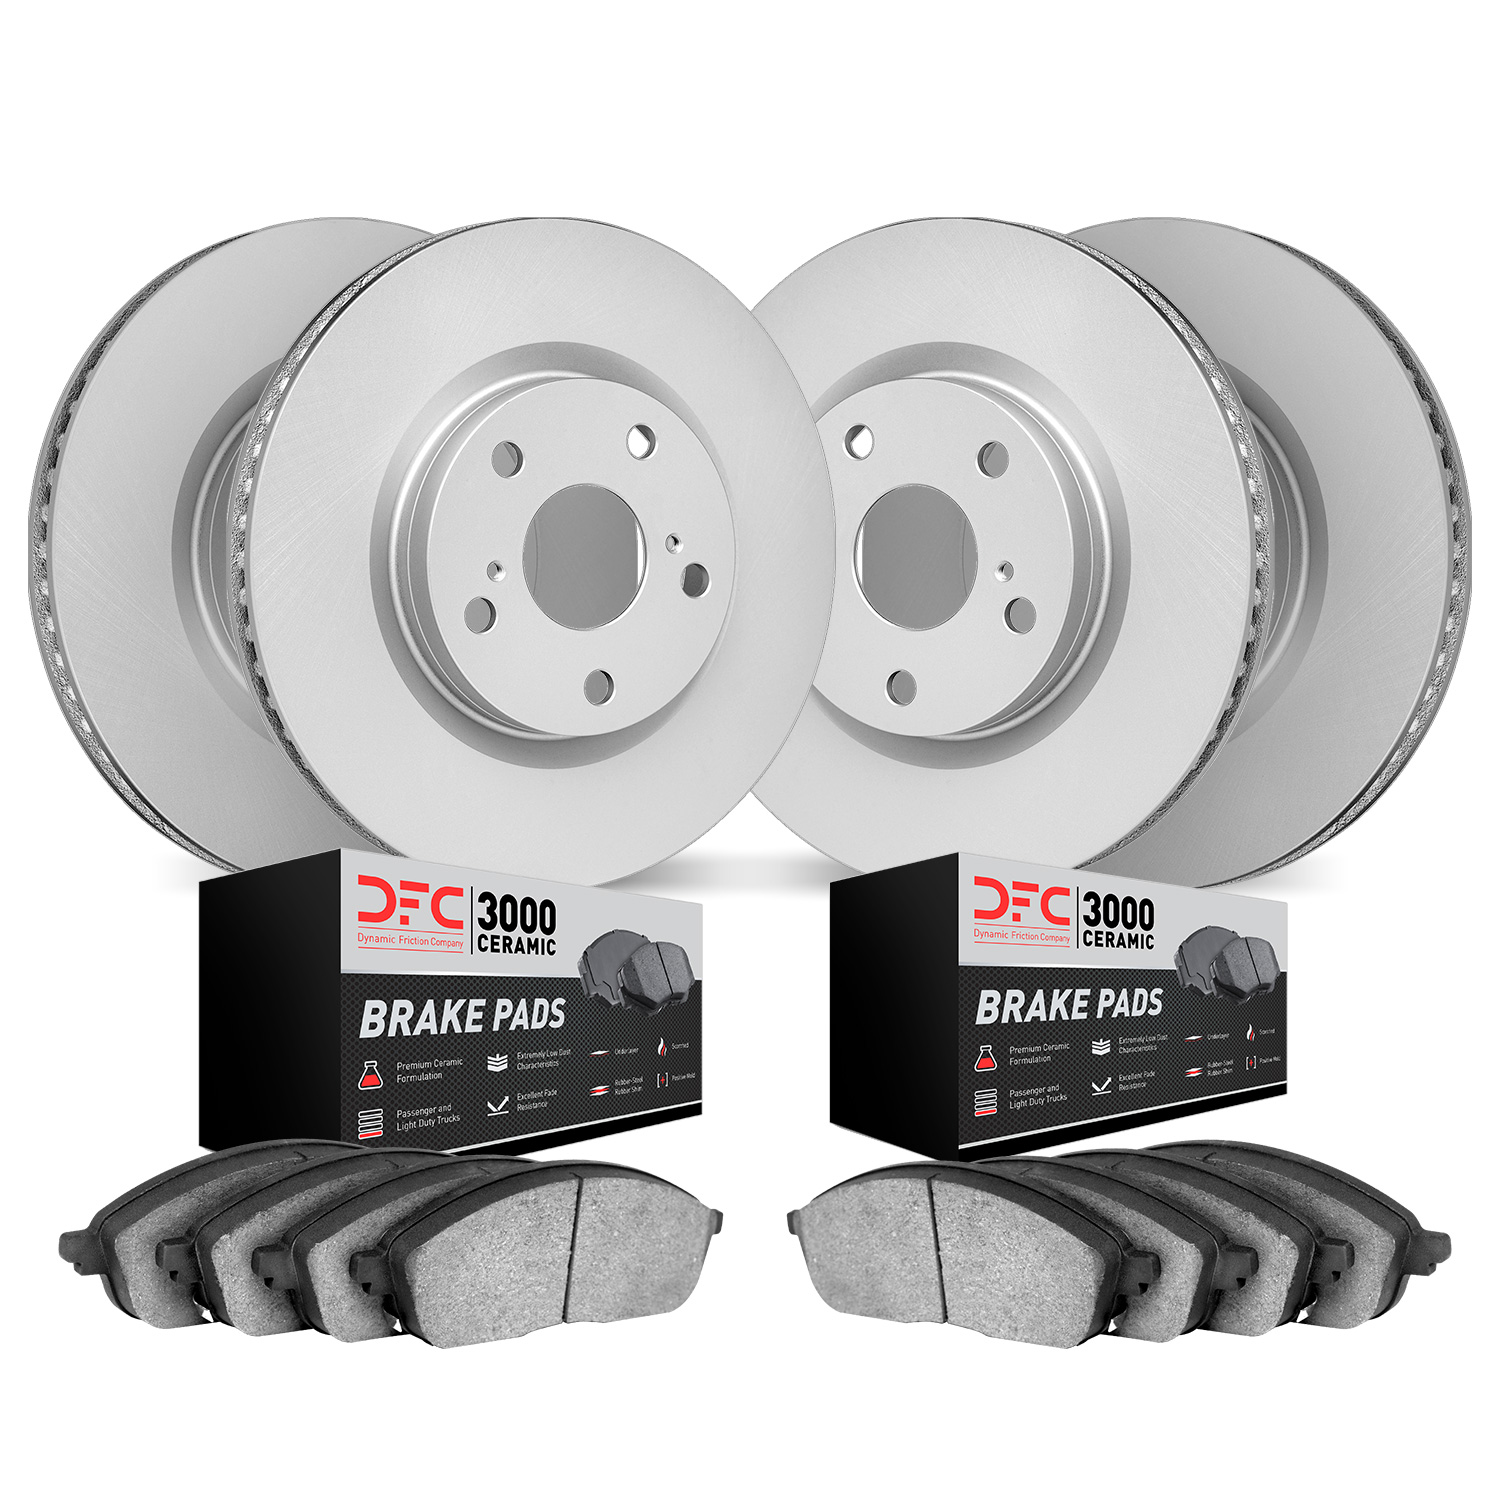 4304-73044 Geospec Brake Rotors with 3000-Series Ceramic Brake Pads Kit, 2013-2017 Audi/Volkswagen, Position: Front and Rear